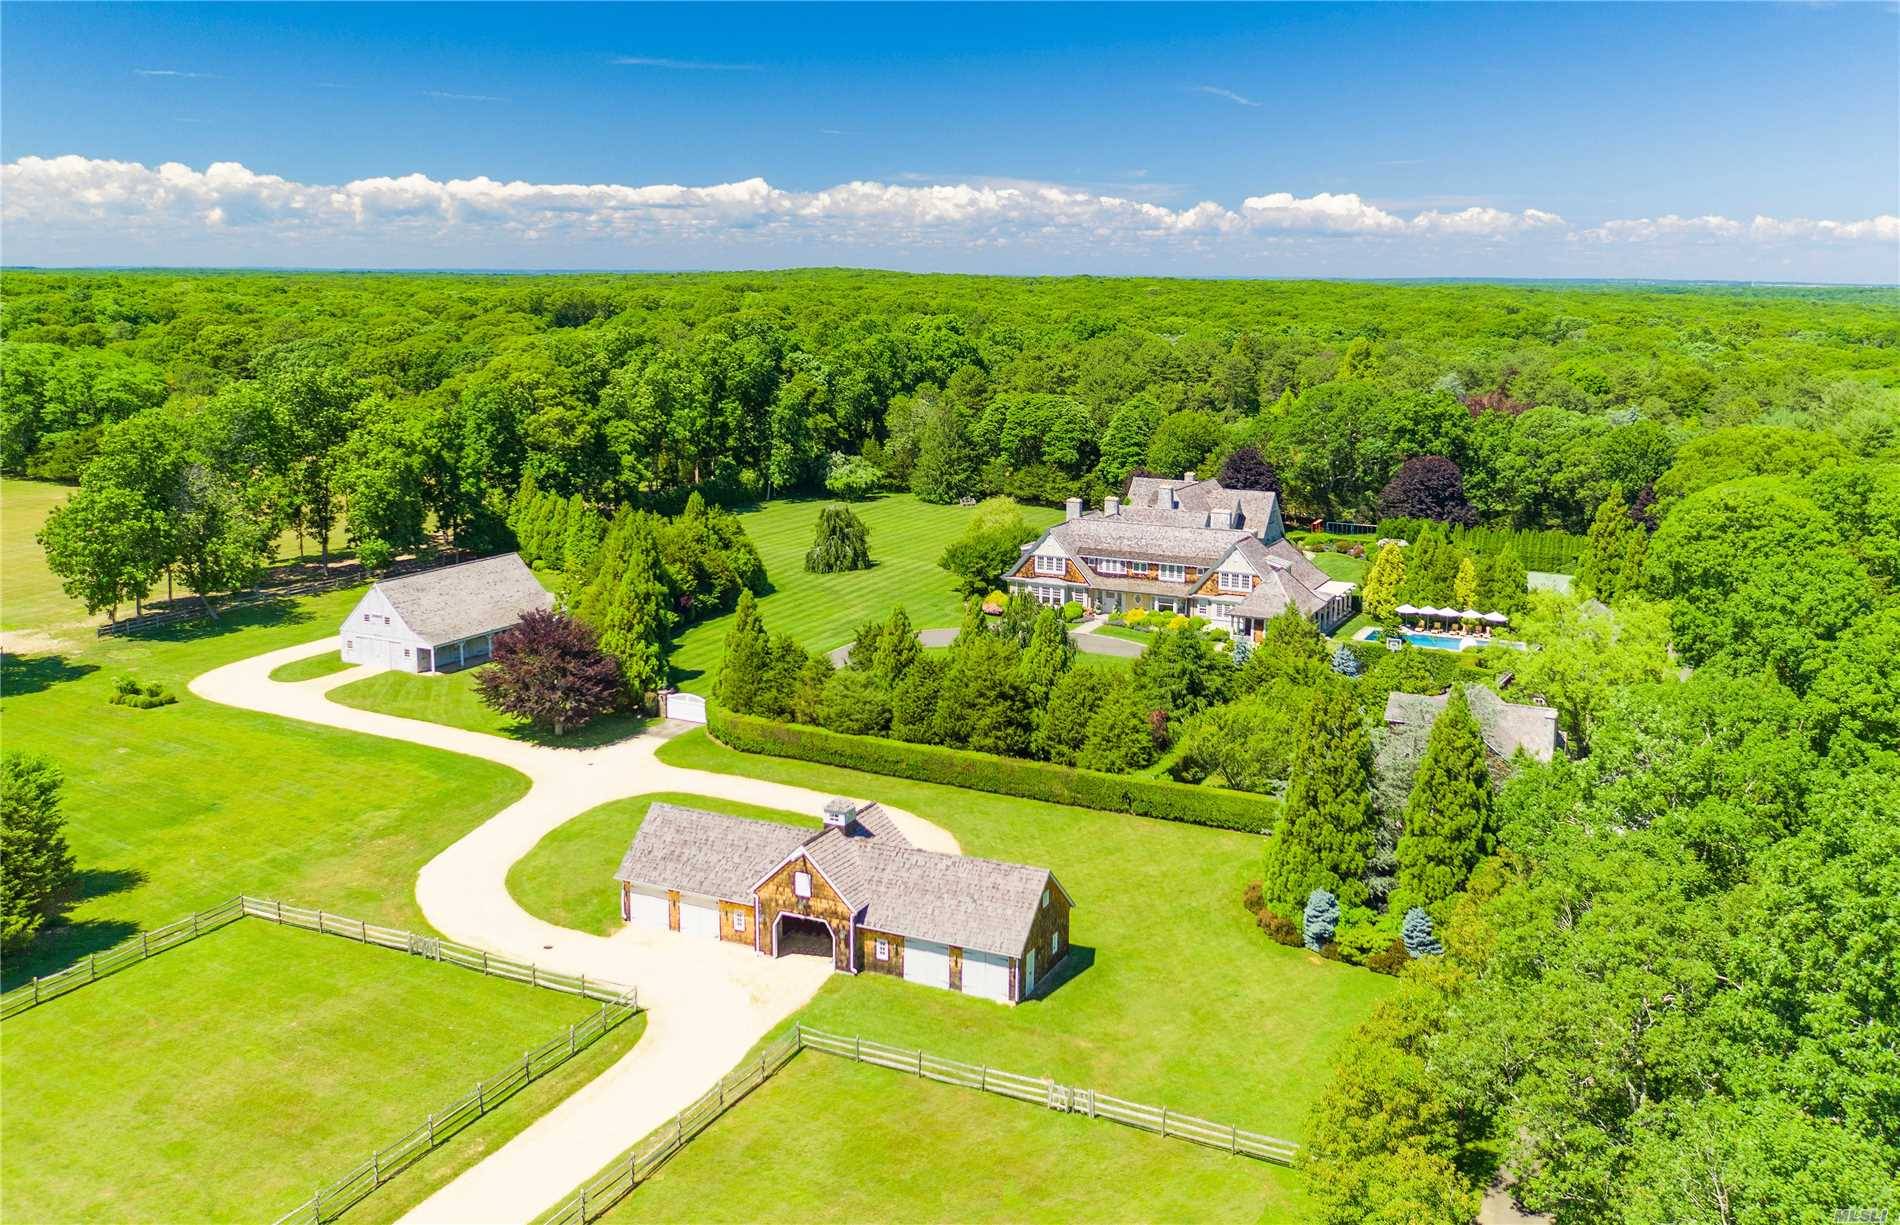 One Of A Kind Distinguished Estate On 8 Acres In East Hampton.